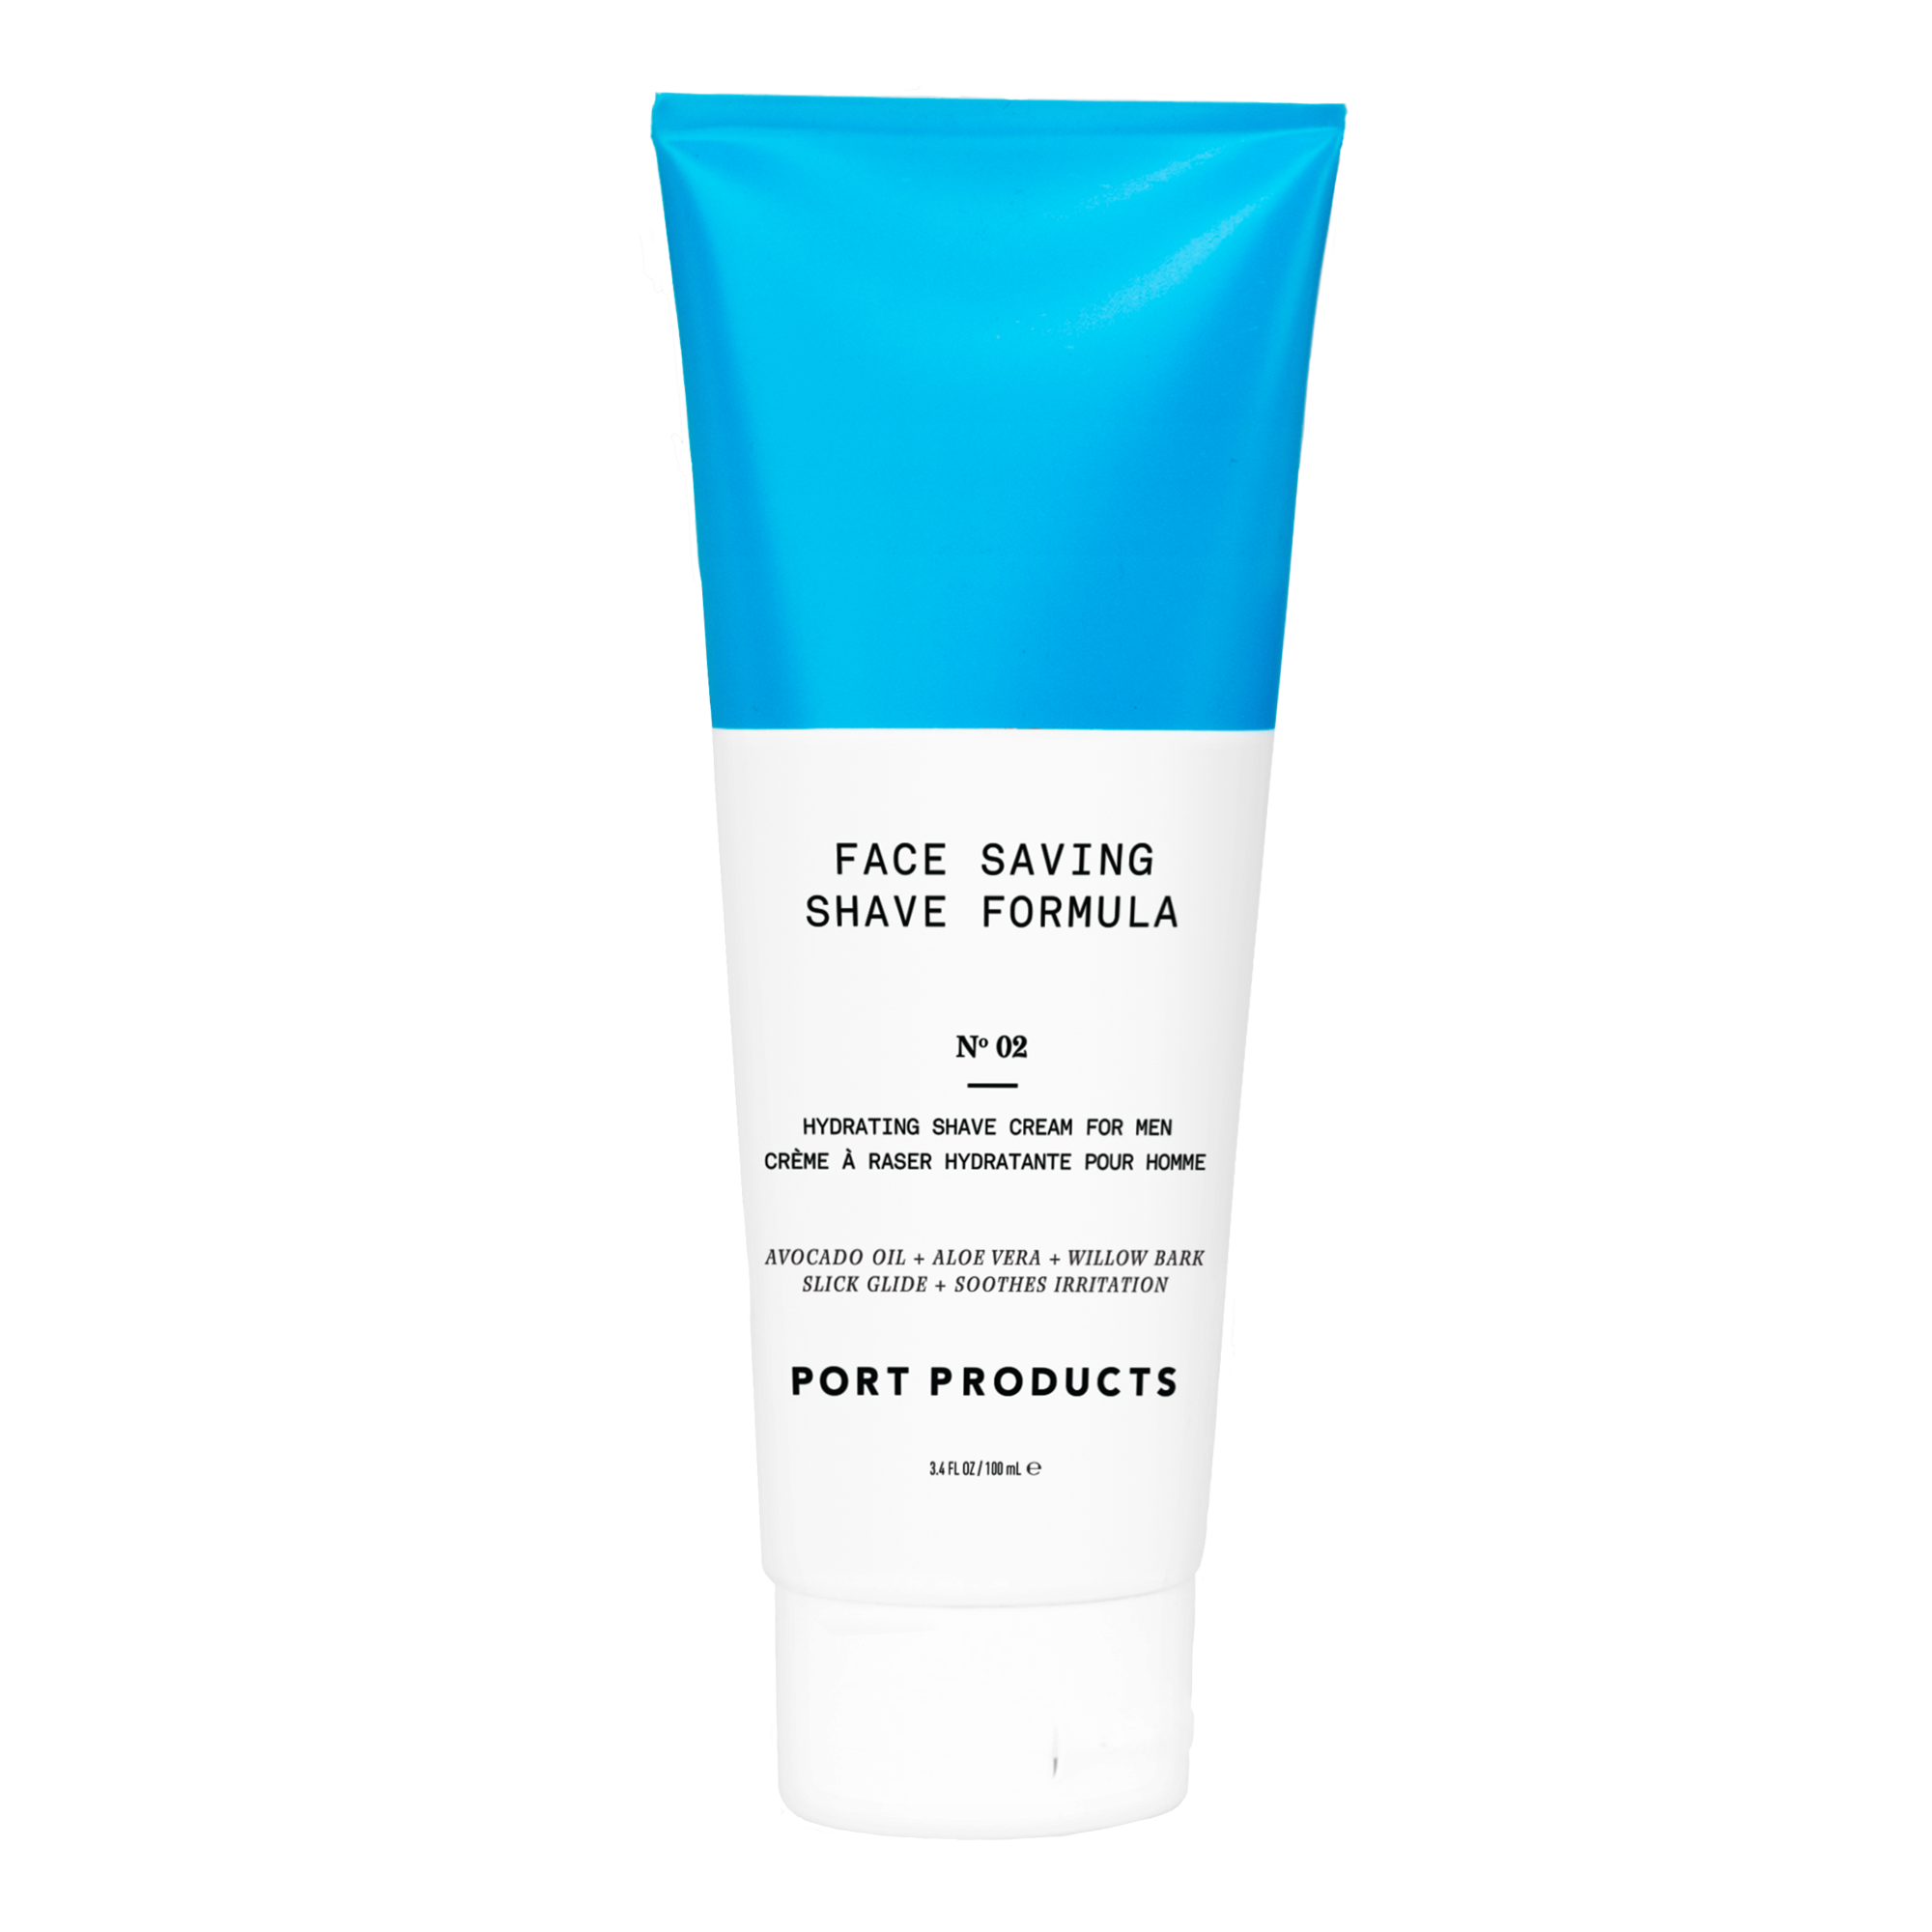 Port Products Face Saving Shave Formula white and blue tube against a white background.